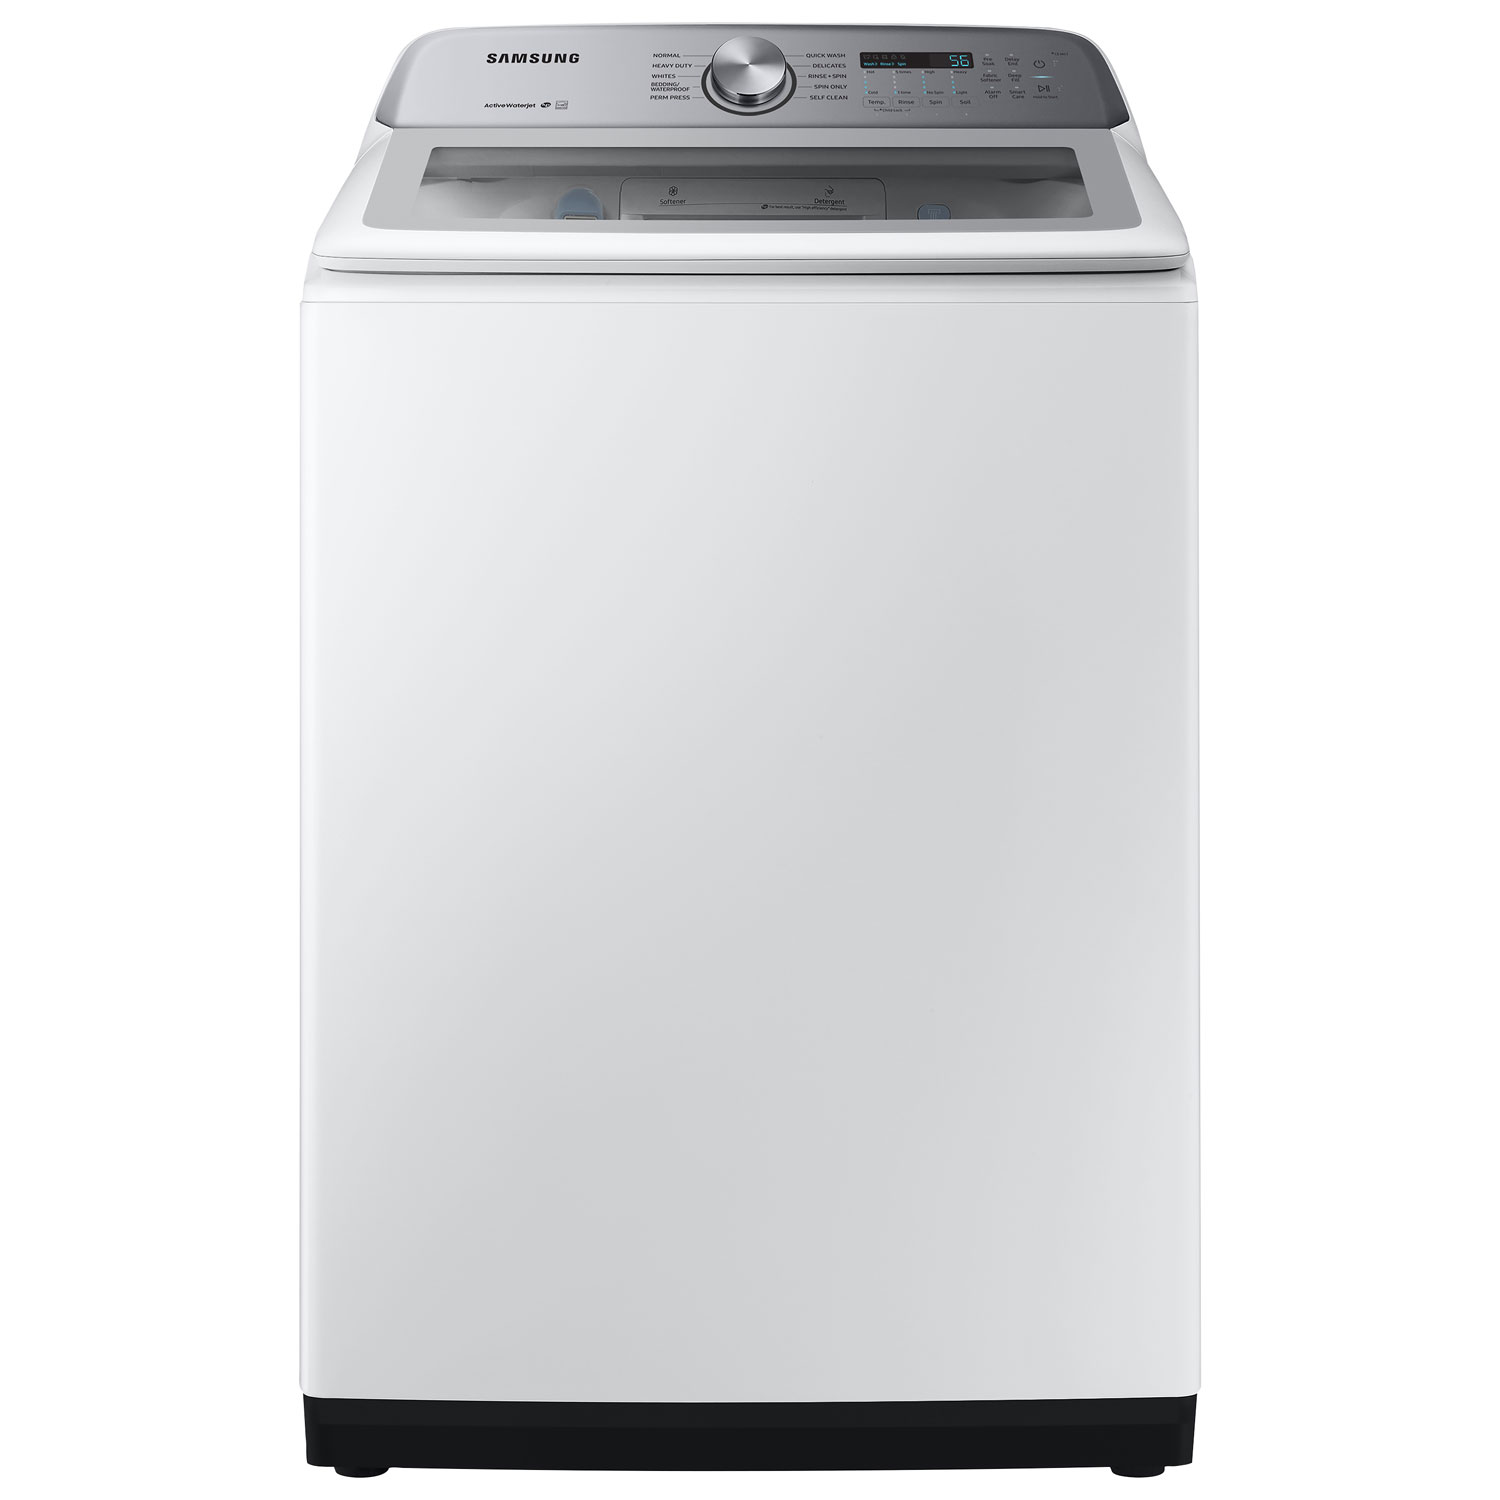 Samsung 5.8 Cu. Ft. High Efficiency Top Load Washer (WA50R5200AW) - White